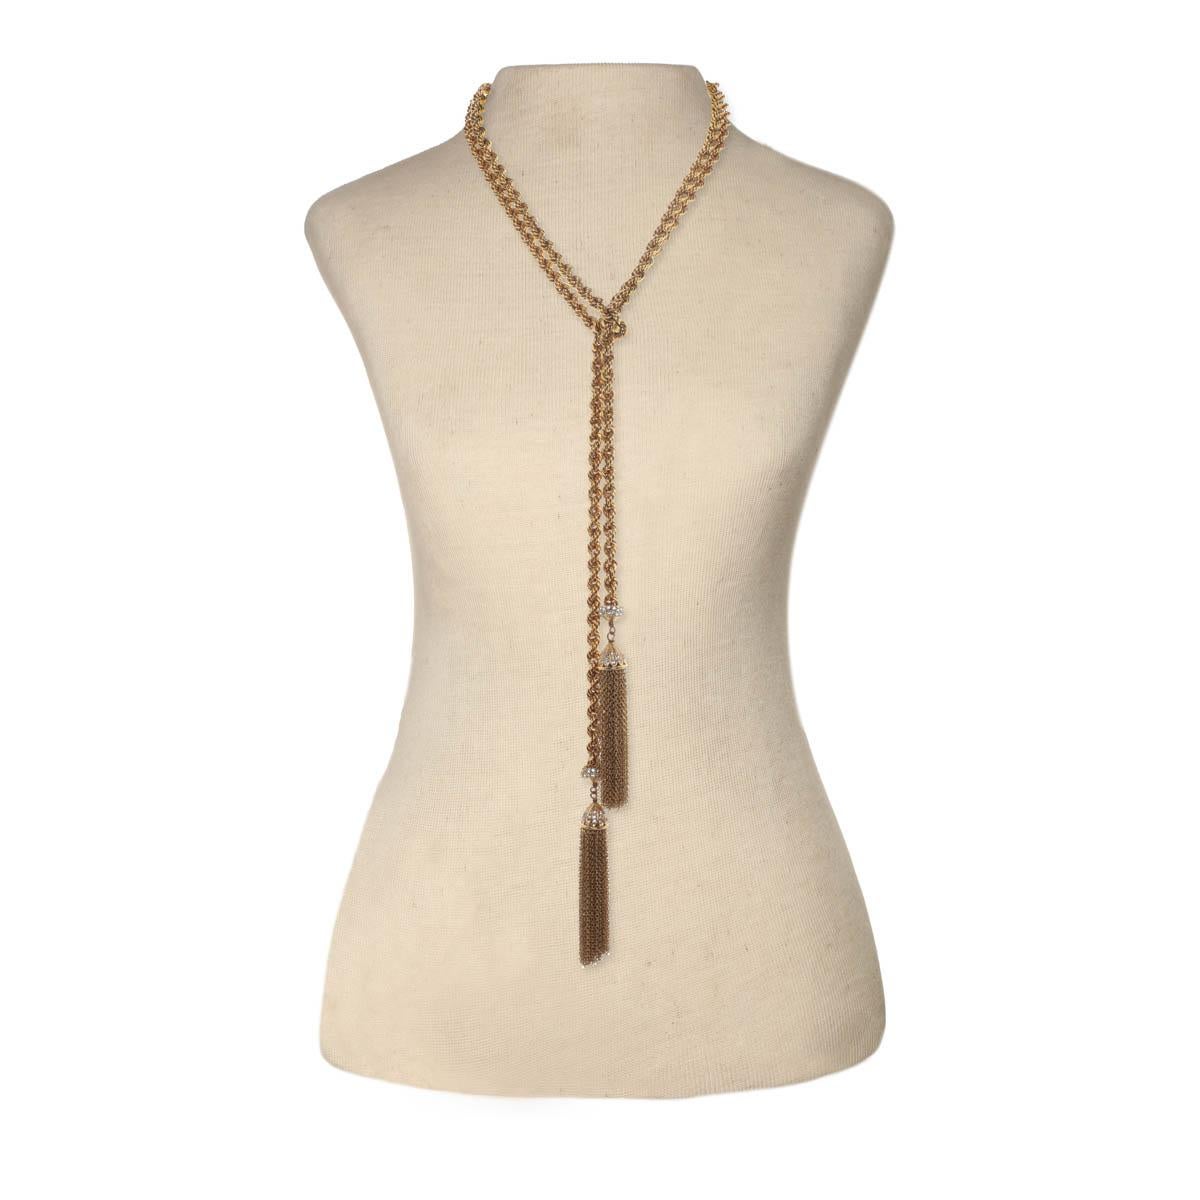 Tassels are timelessly chic and the perfect accessory for every season and every occasion! A CINER favorite, this tassel necklace is extremely versatile. Wear it as a necklace for classic appeal or as a belt for a chic on-the-go fashion